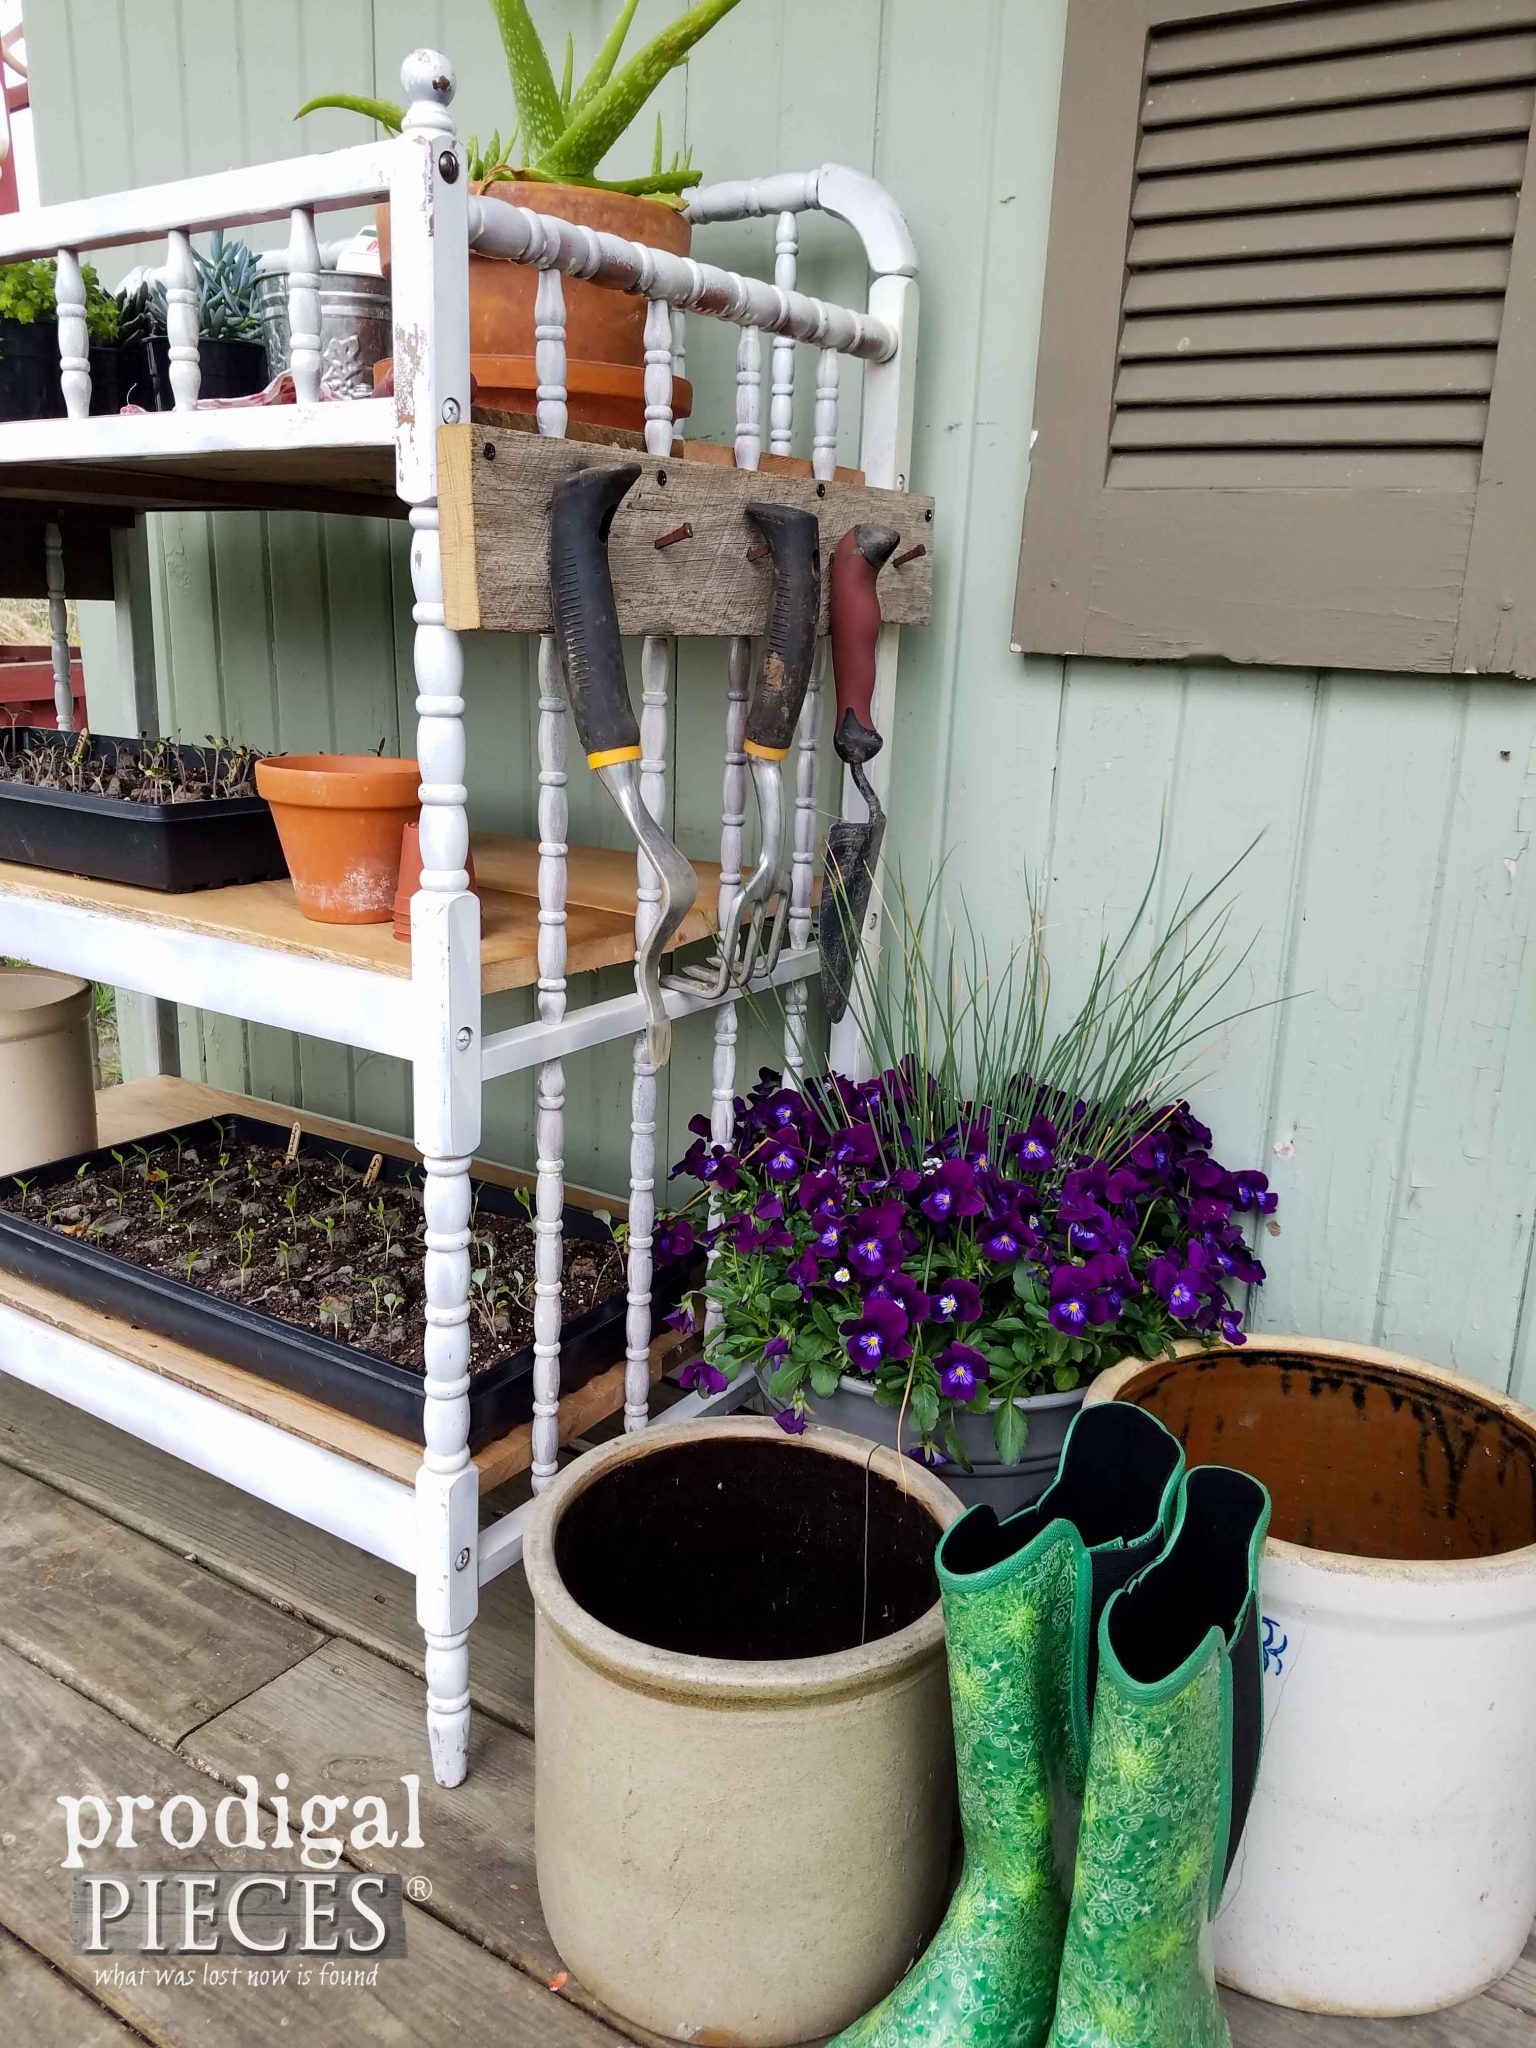 Tool Rack on Repurposed Potting Bench by Prodigal Pieces | prodigalpieces.com